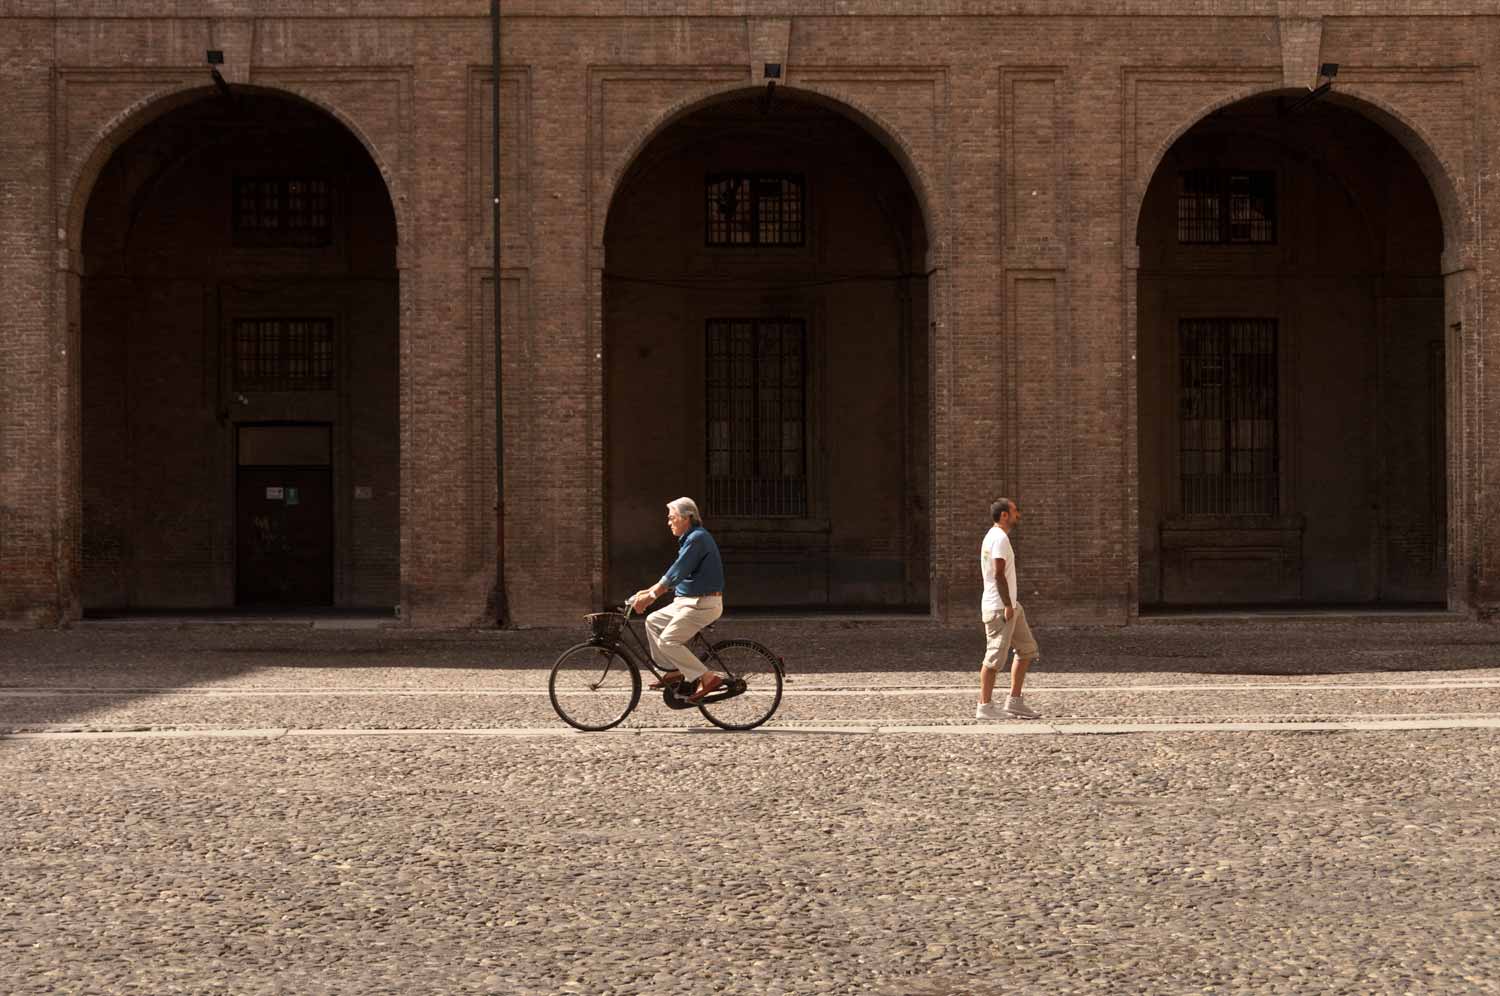 In the internal courtyard, a cyclist passes a pedestrian headed for Parco Ducale.